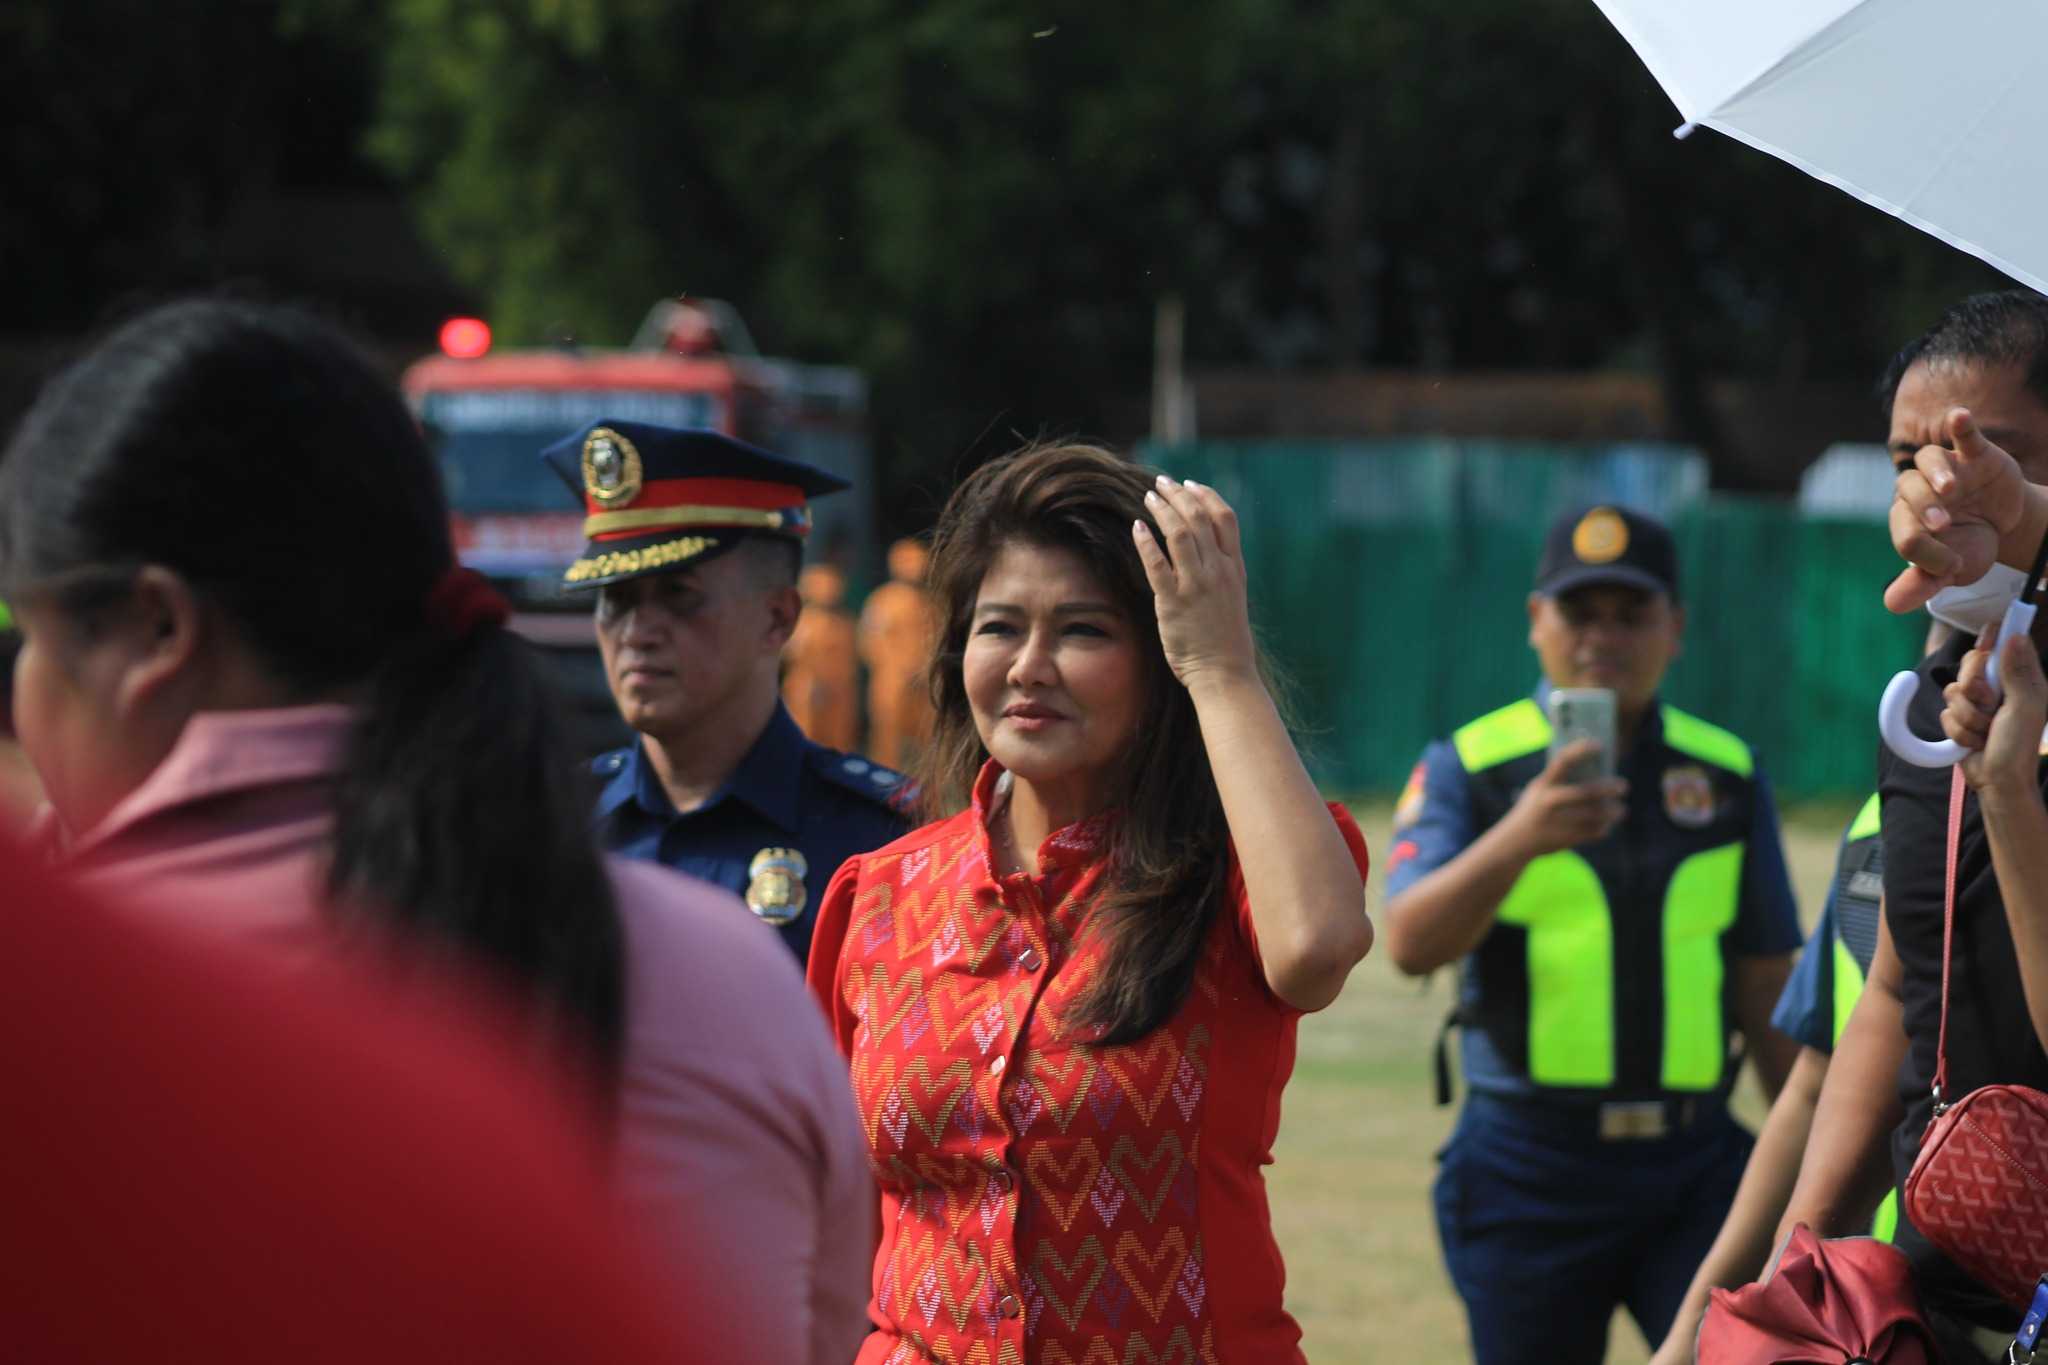 Imee Marcos sides with VP Duterte’s position on peace talks